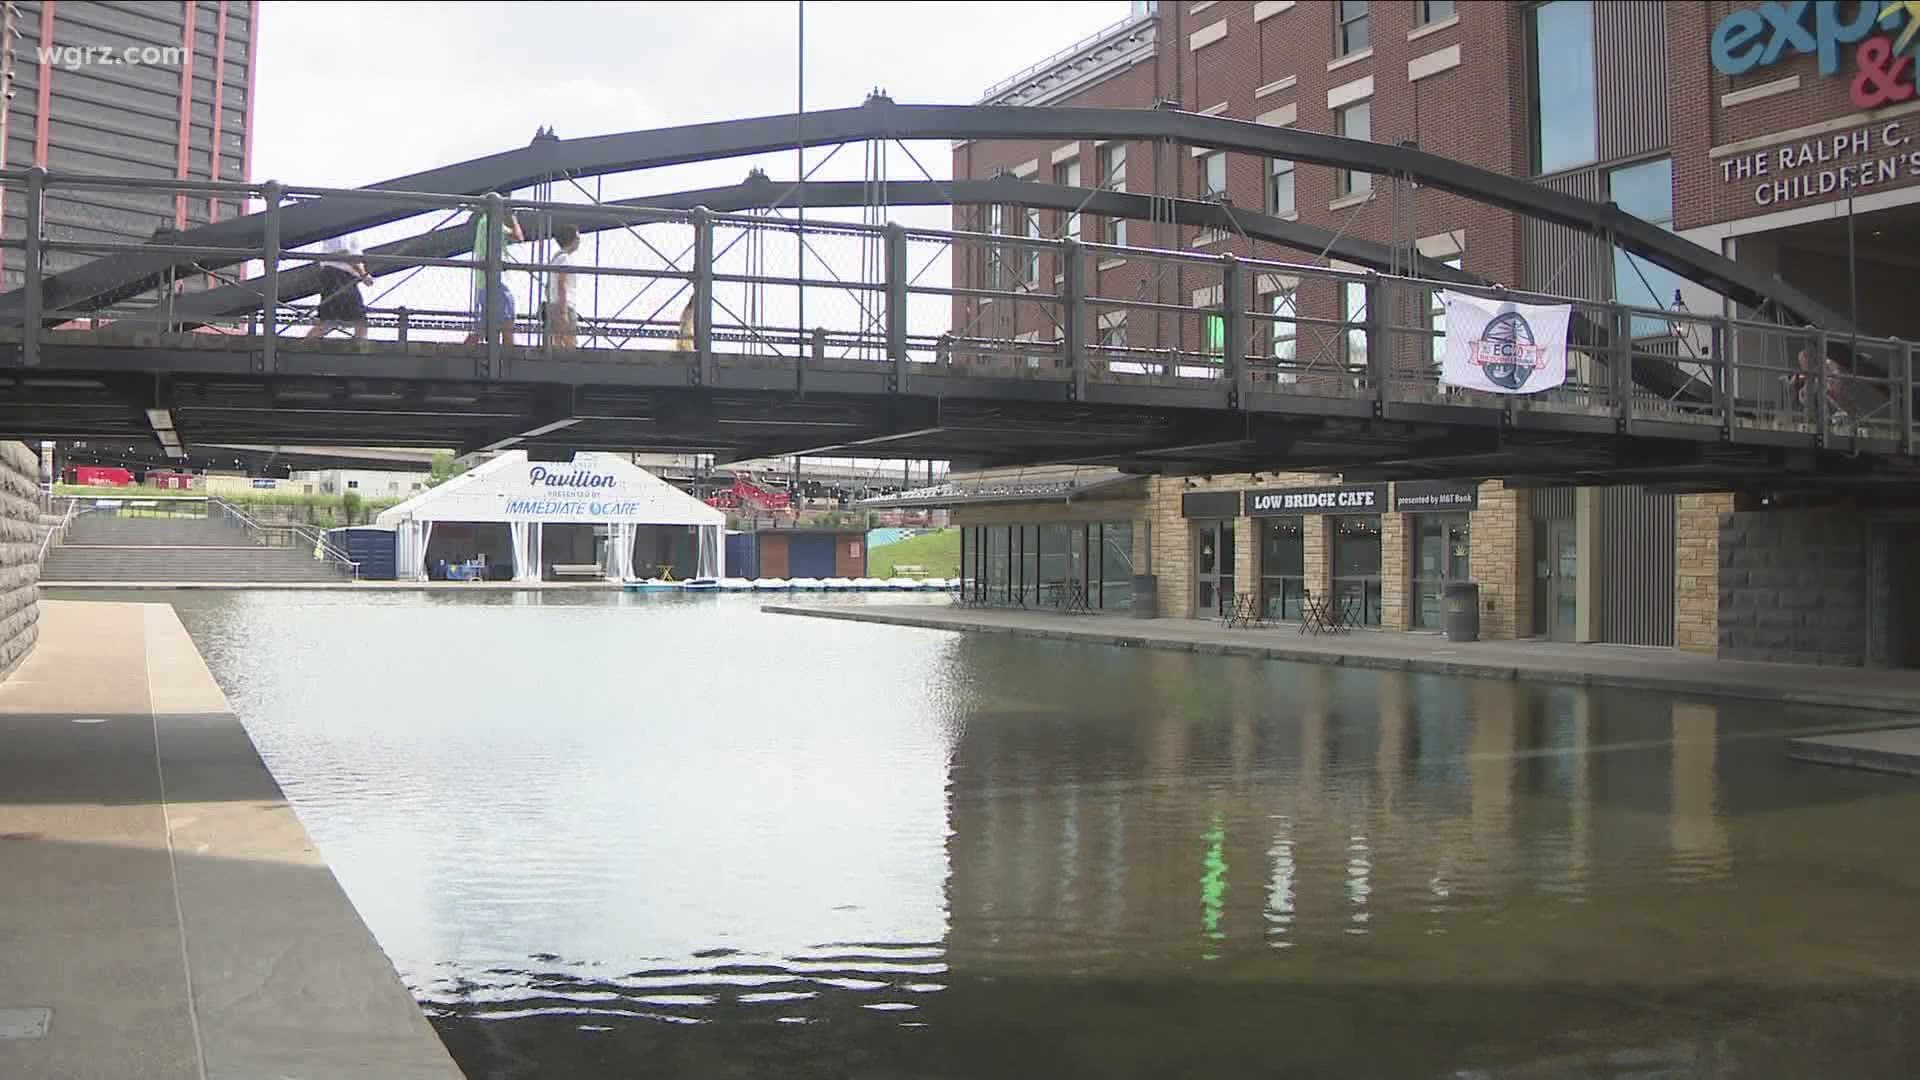 Canalside will be drained to make roller rink